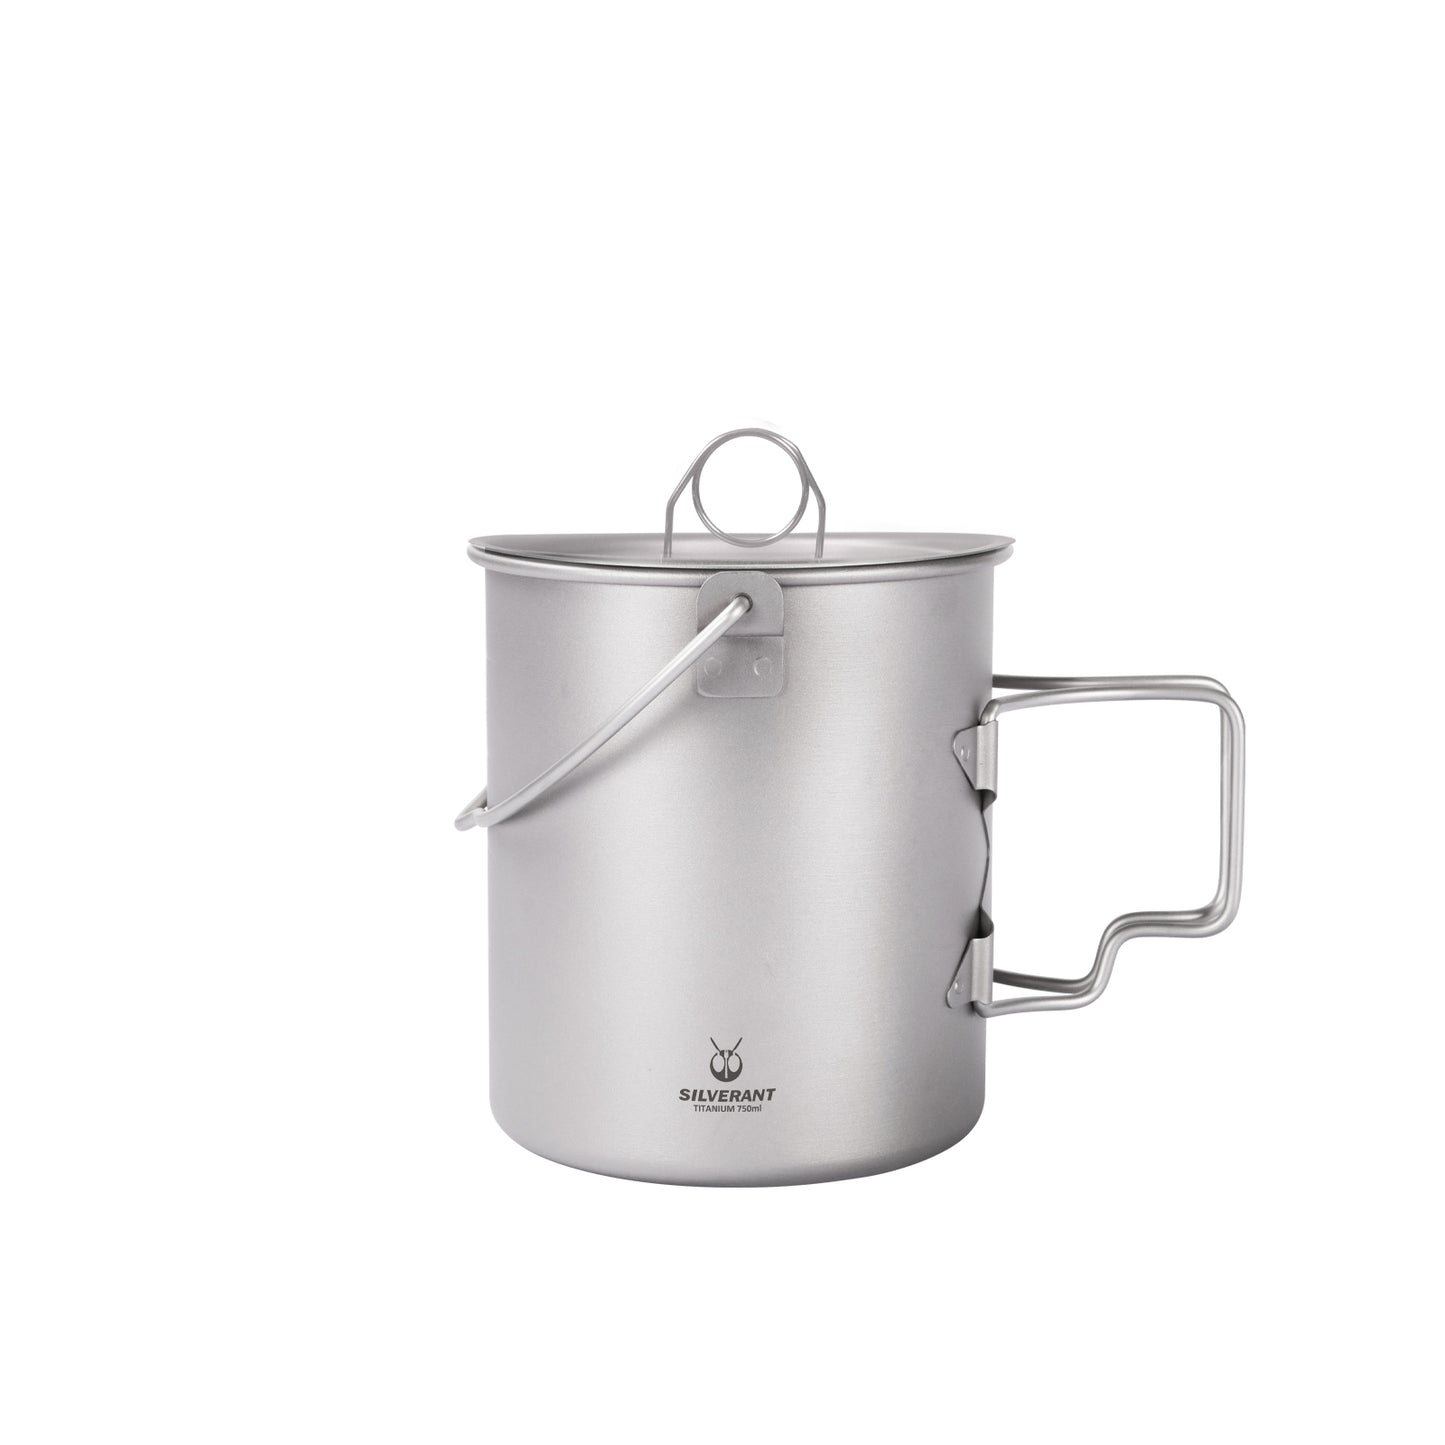 Titanium Pot 750ml/25 fl oz with Lid and Bail Handle - SilverAnt Outdoors